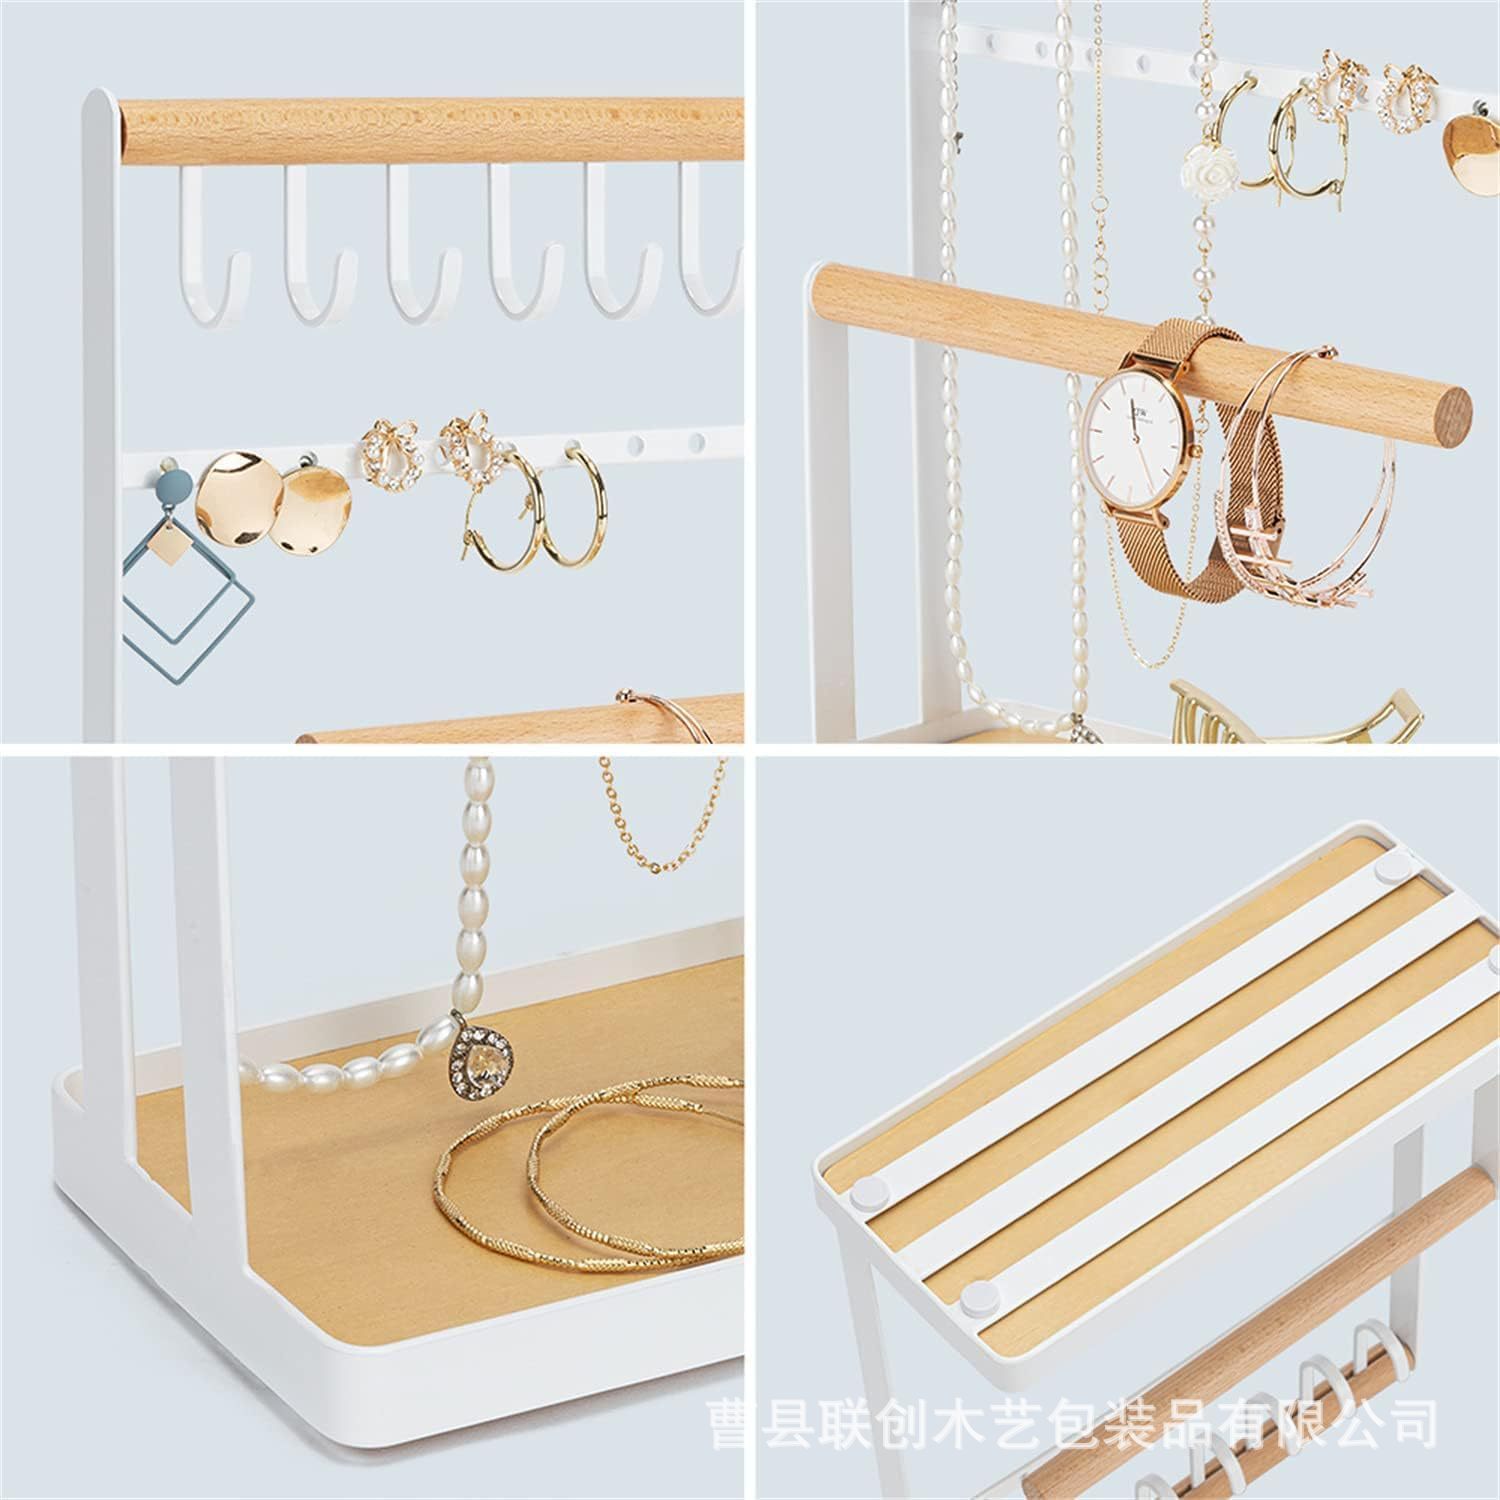 Wooden Jewelry Rack Key Storage Rack with Hook Desktop Jewelry Display Stand with Tray Solid Wood Watch Display Rack